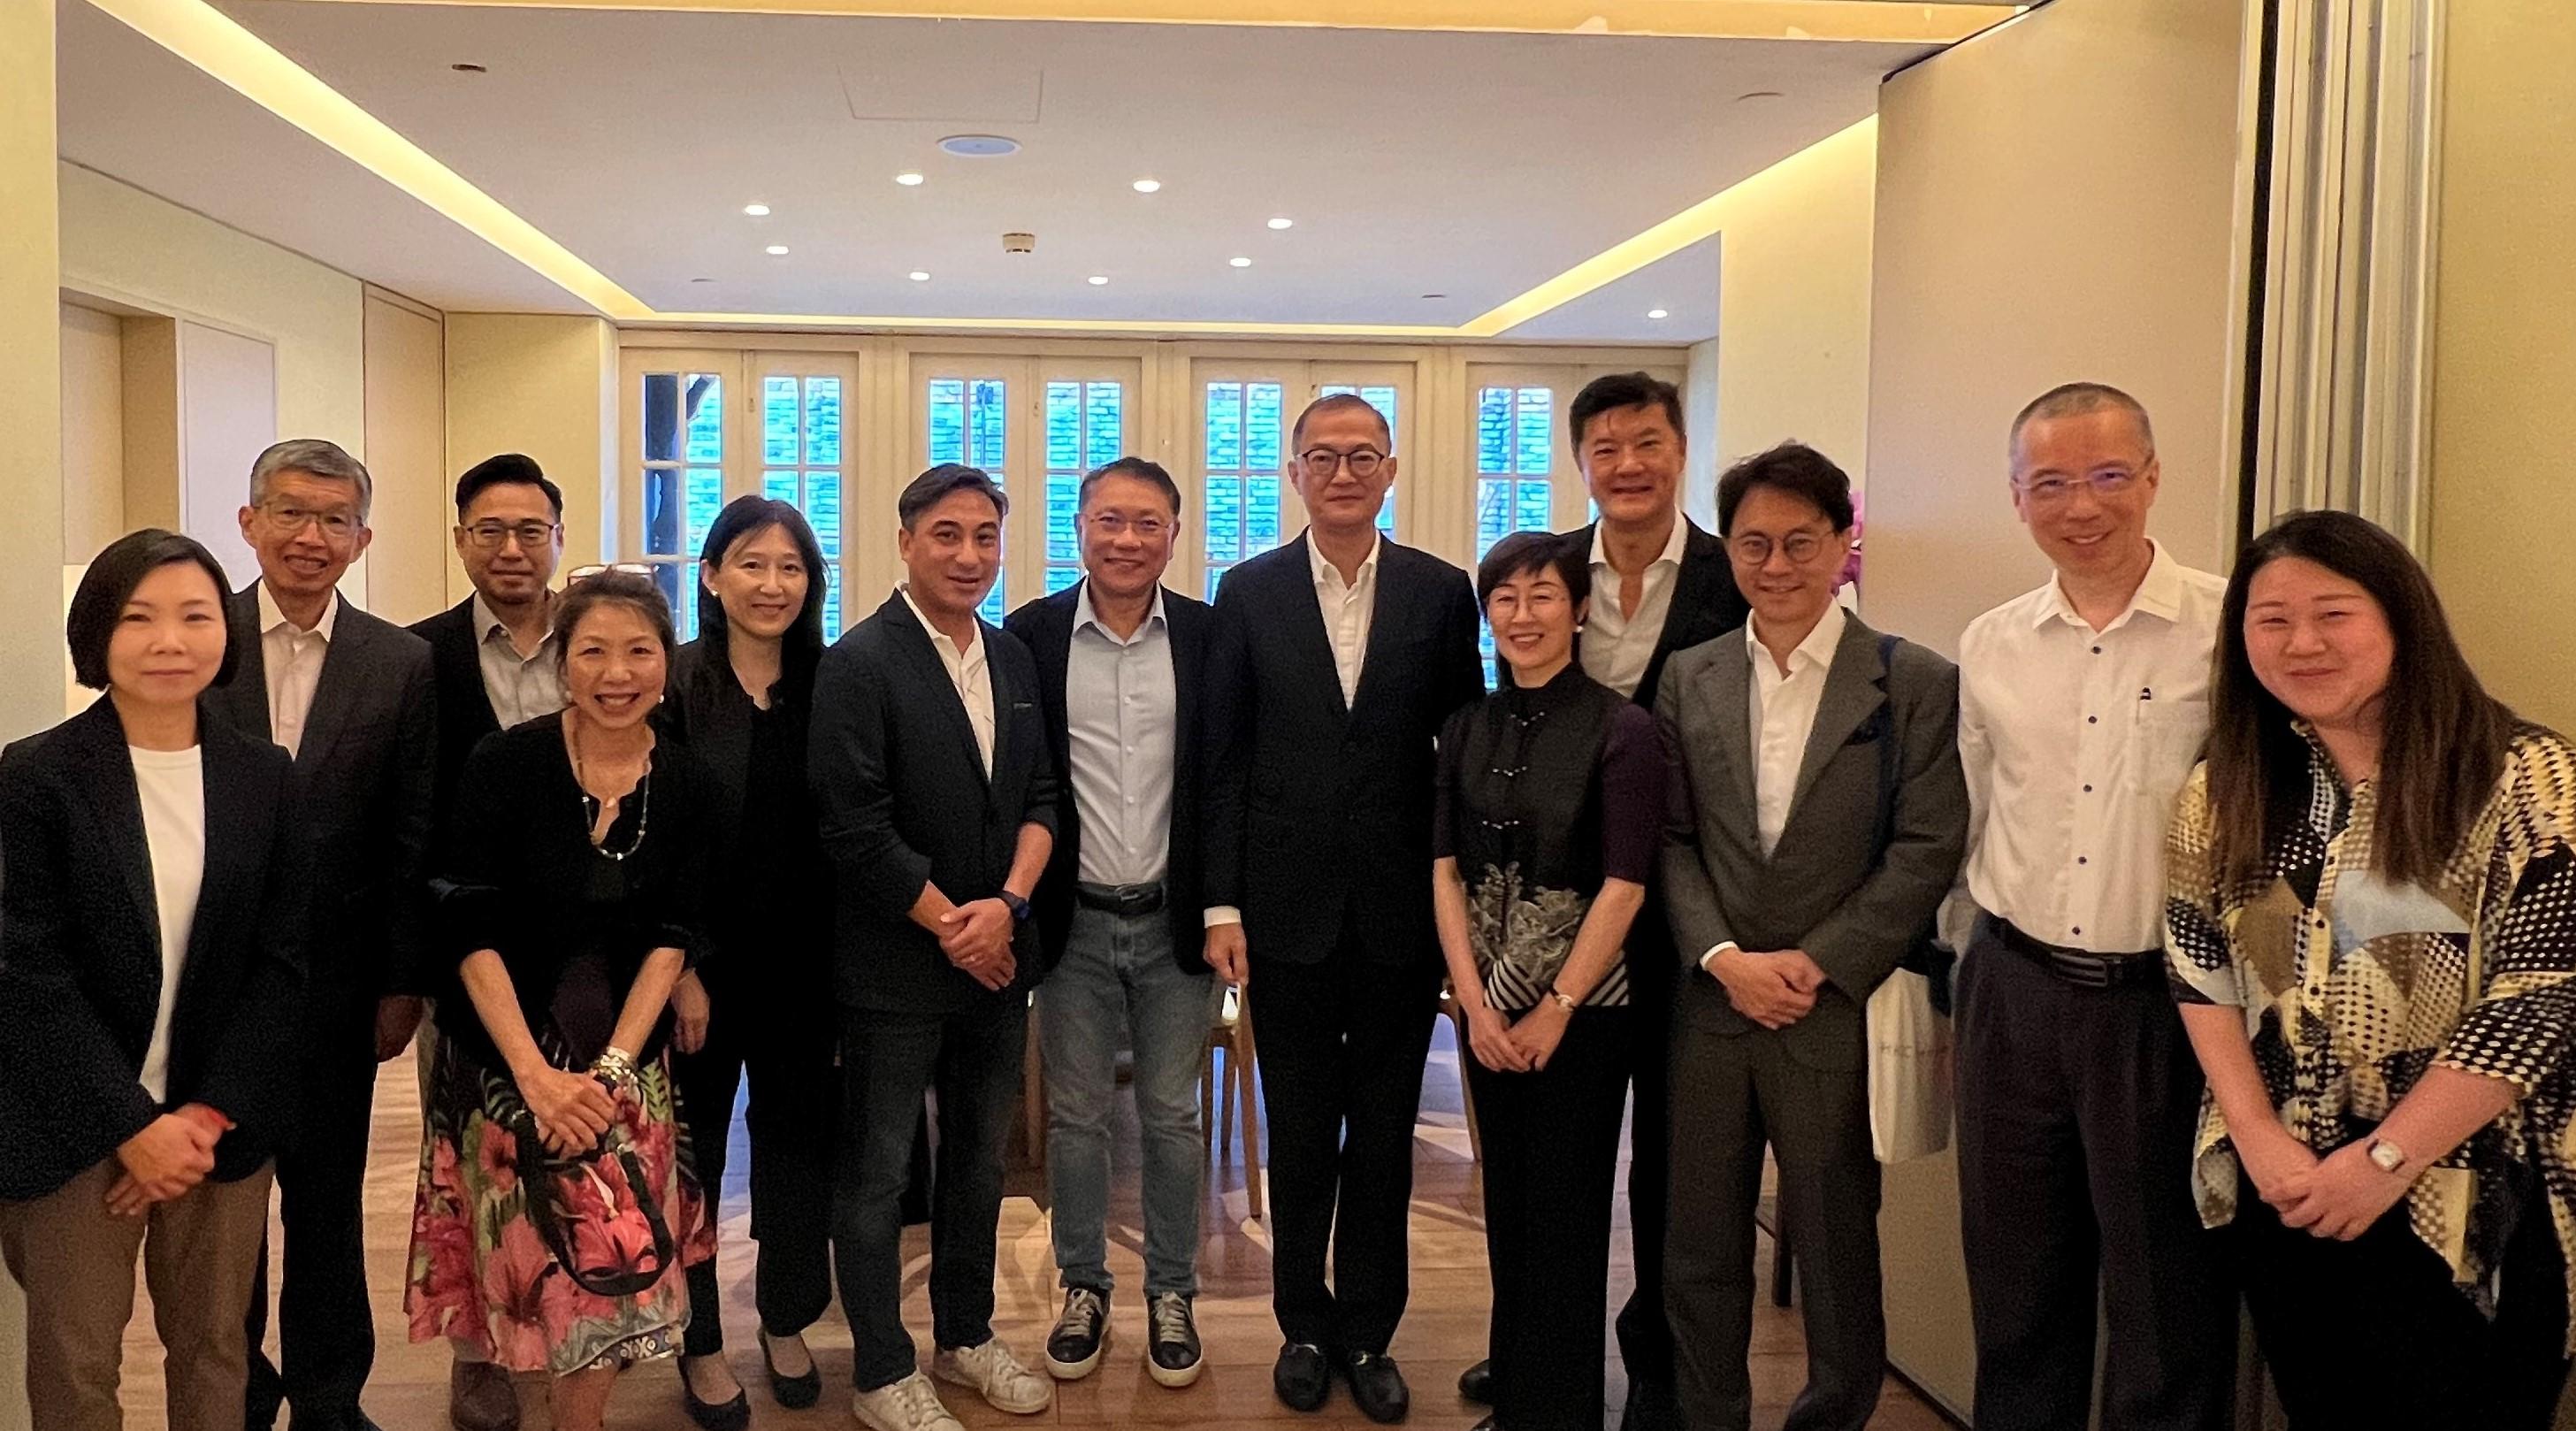 The Secretary for Health, Professor Lo Chung-mau (sixth right), meets Hong Kong people living in Shanghai, including some practising in the healthcare profession there, for lunch today (June 10) to understand more about their daily life there.